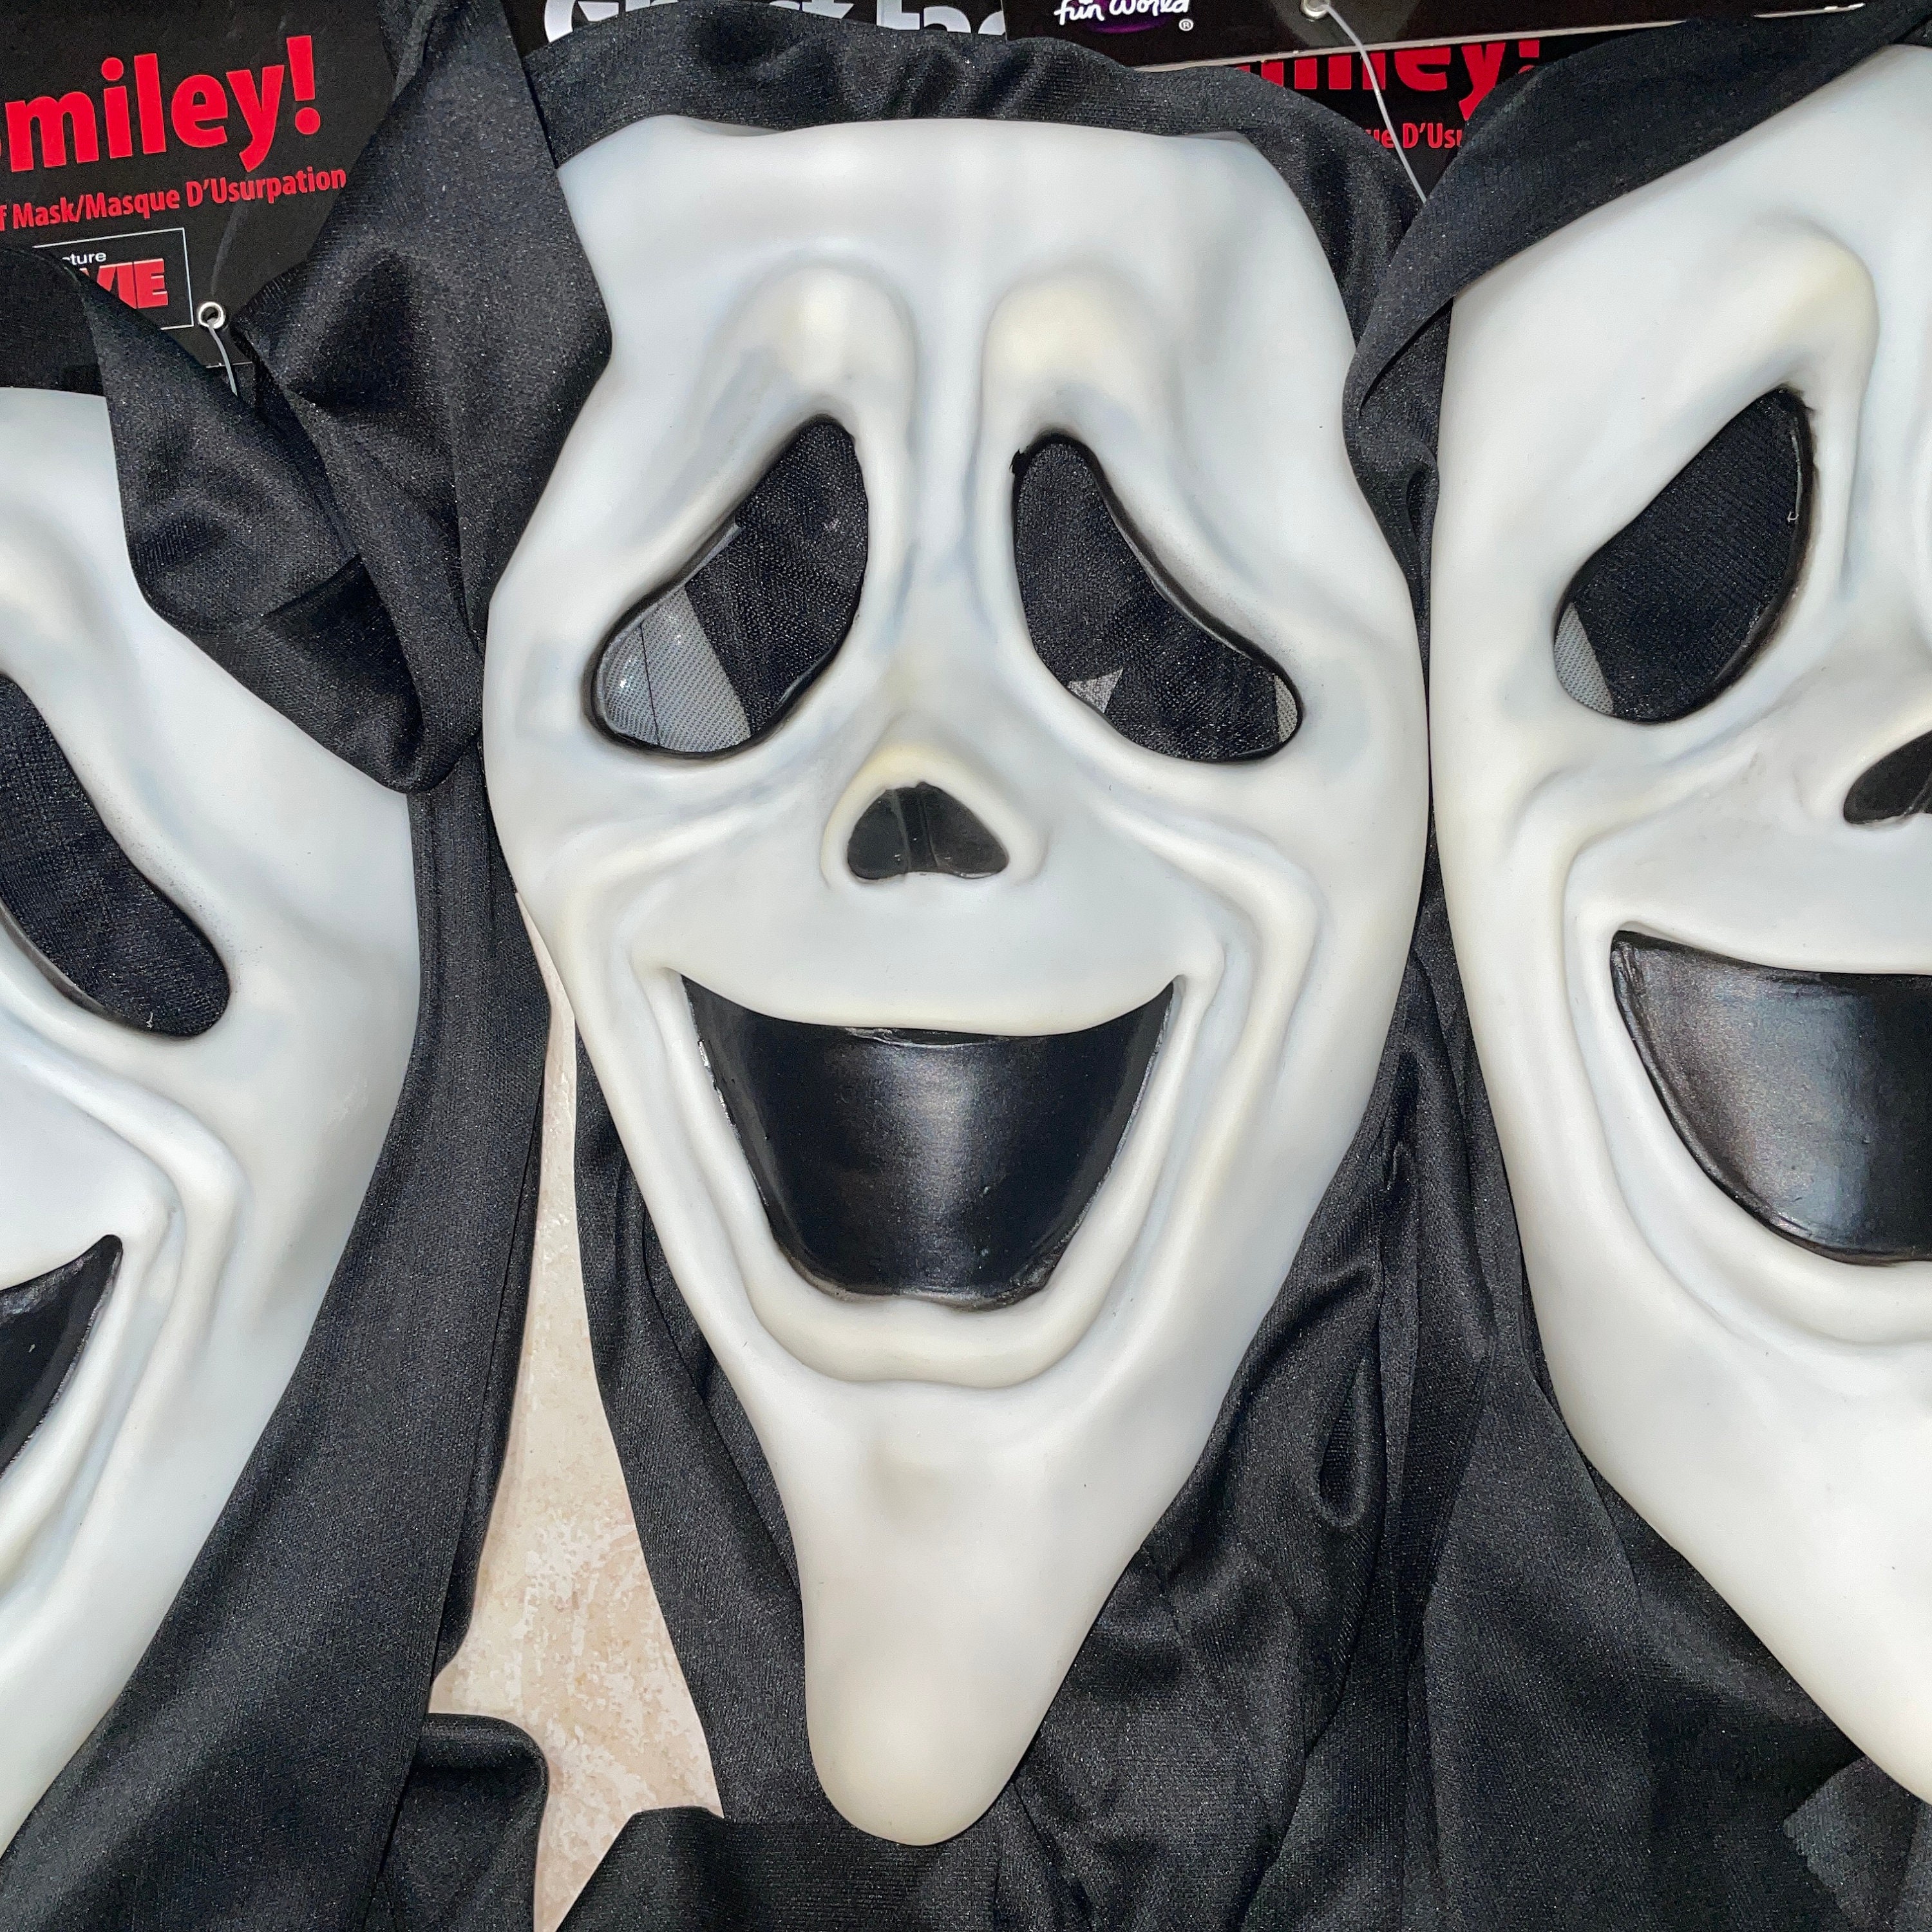 Scary Movie Smiley Ghost Face With Shroud Costume Mask With flaws NWT 